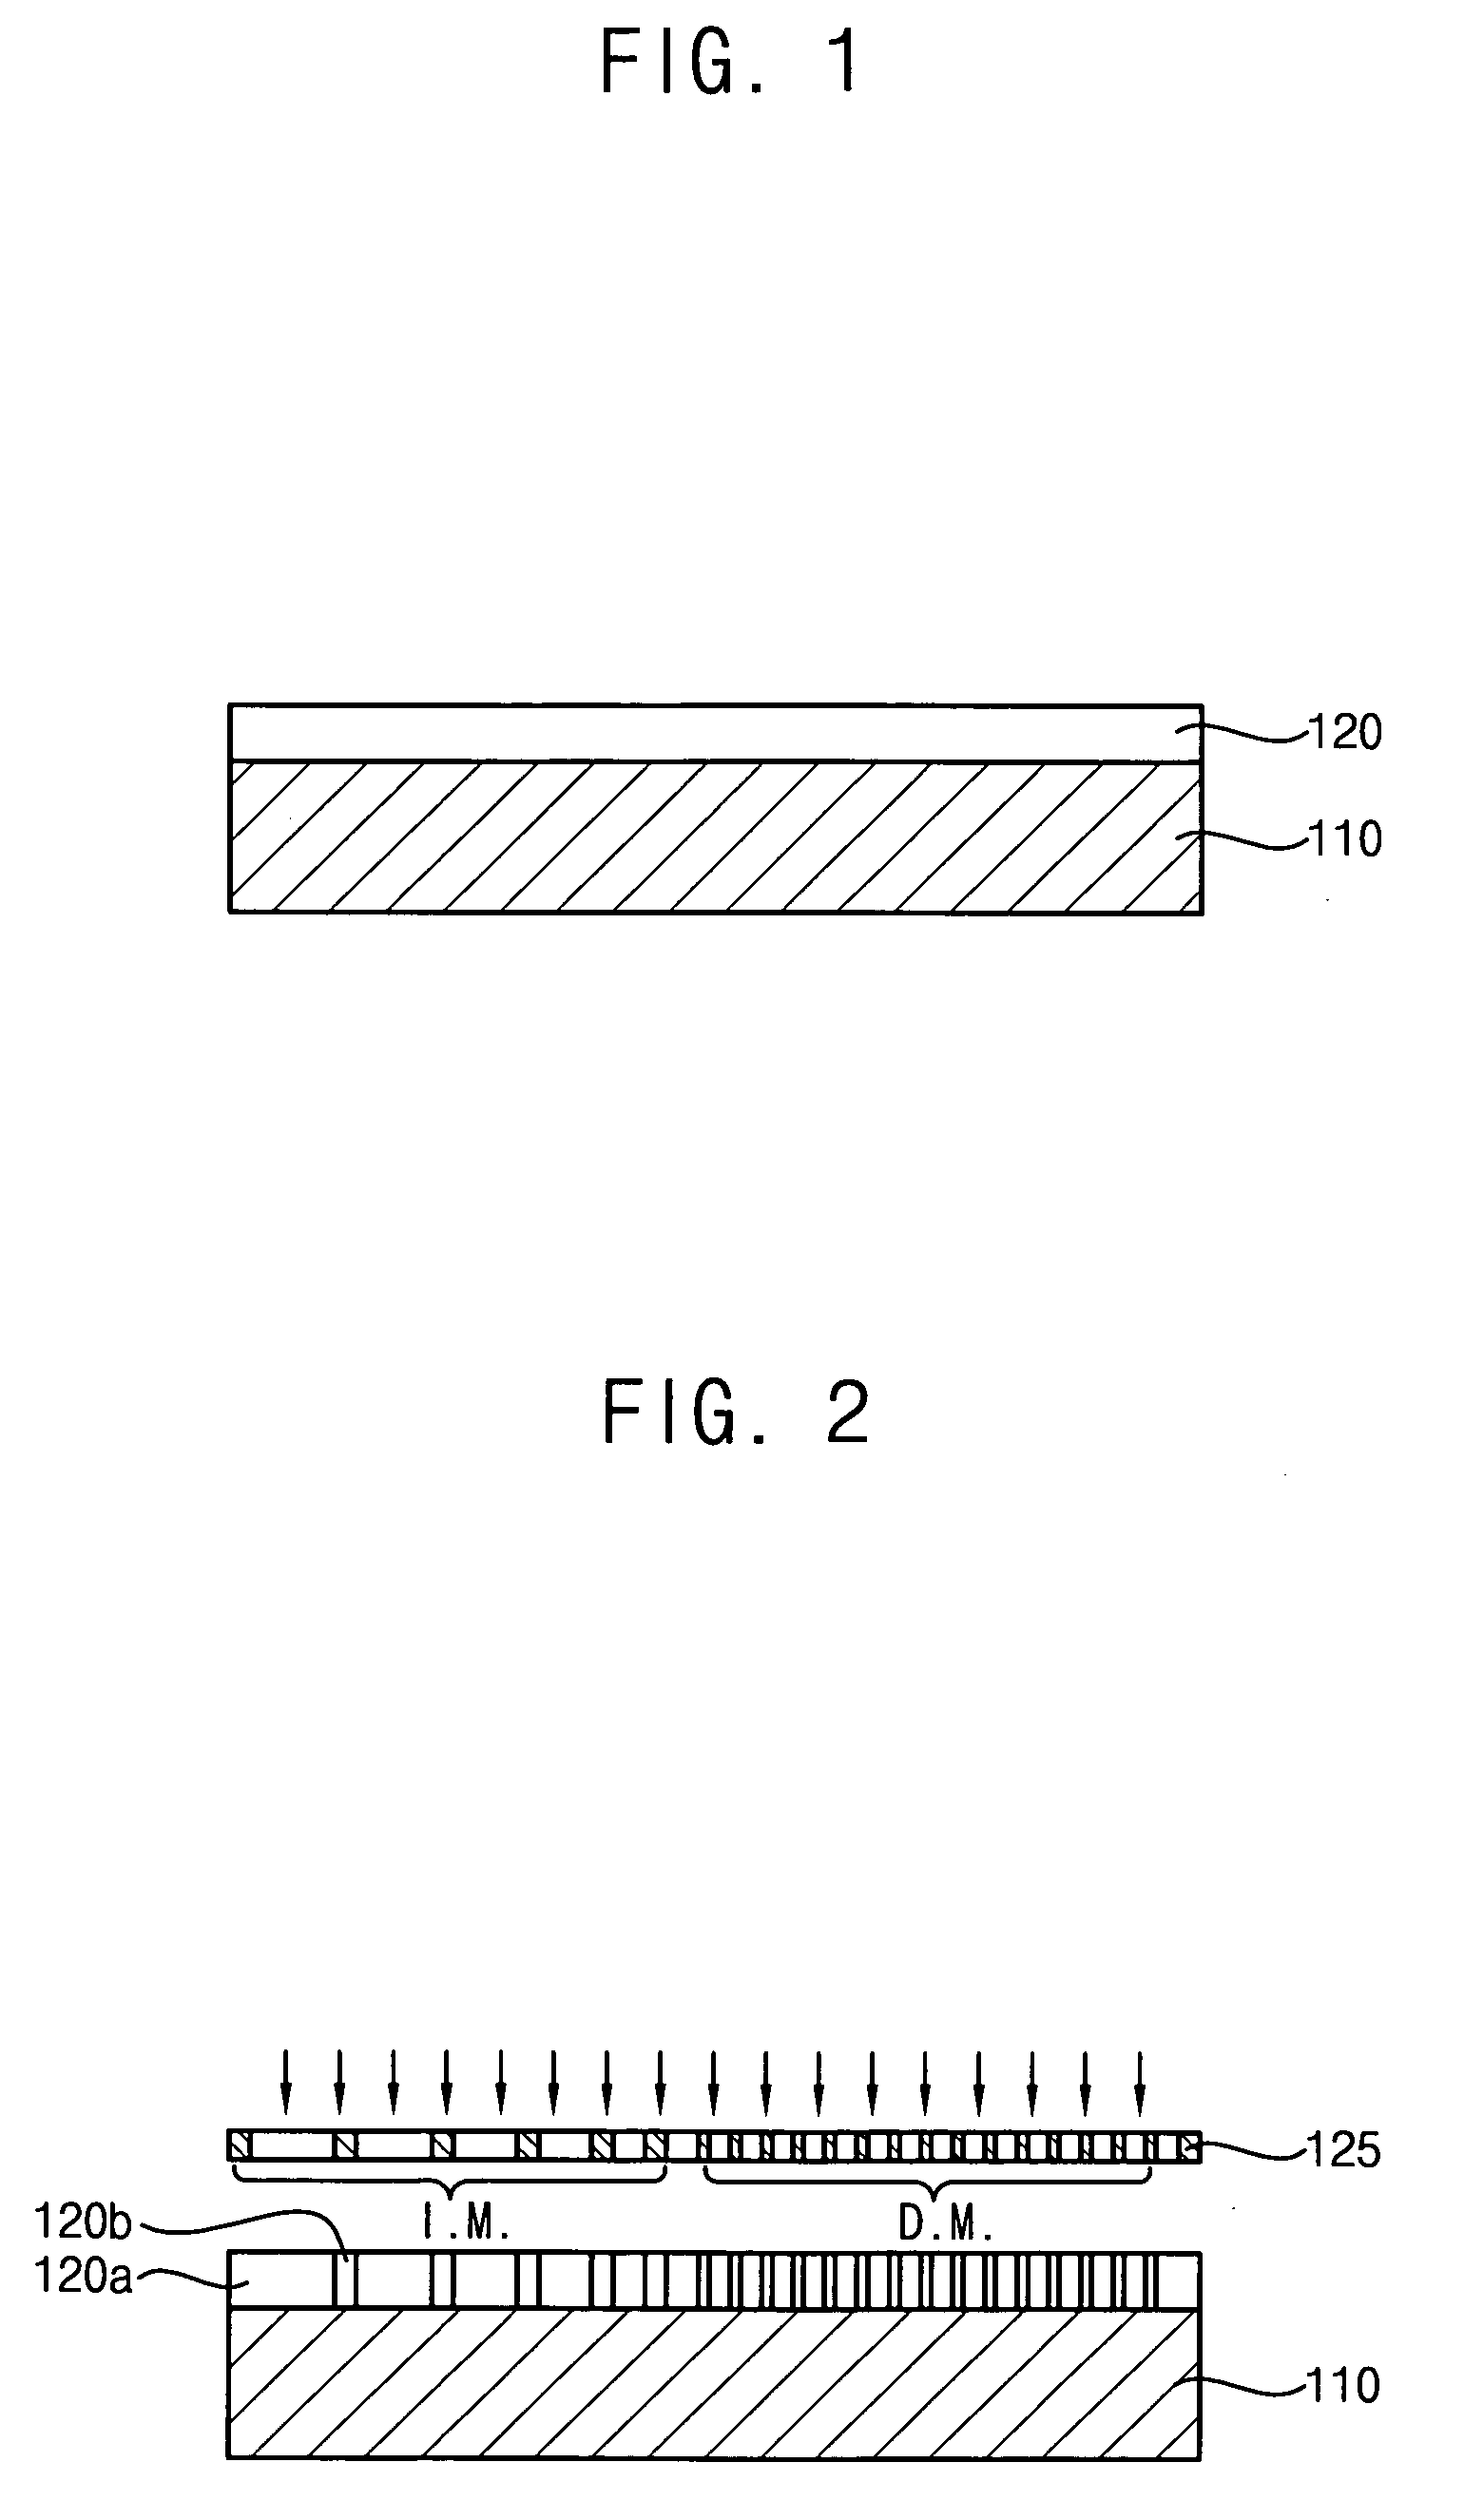 Photoresist composition and method of forming a pattern using the same